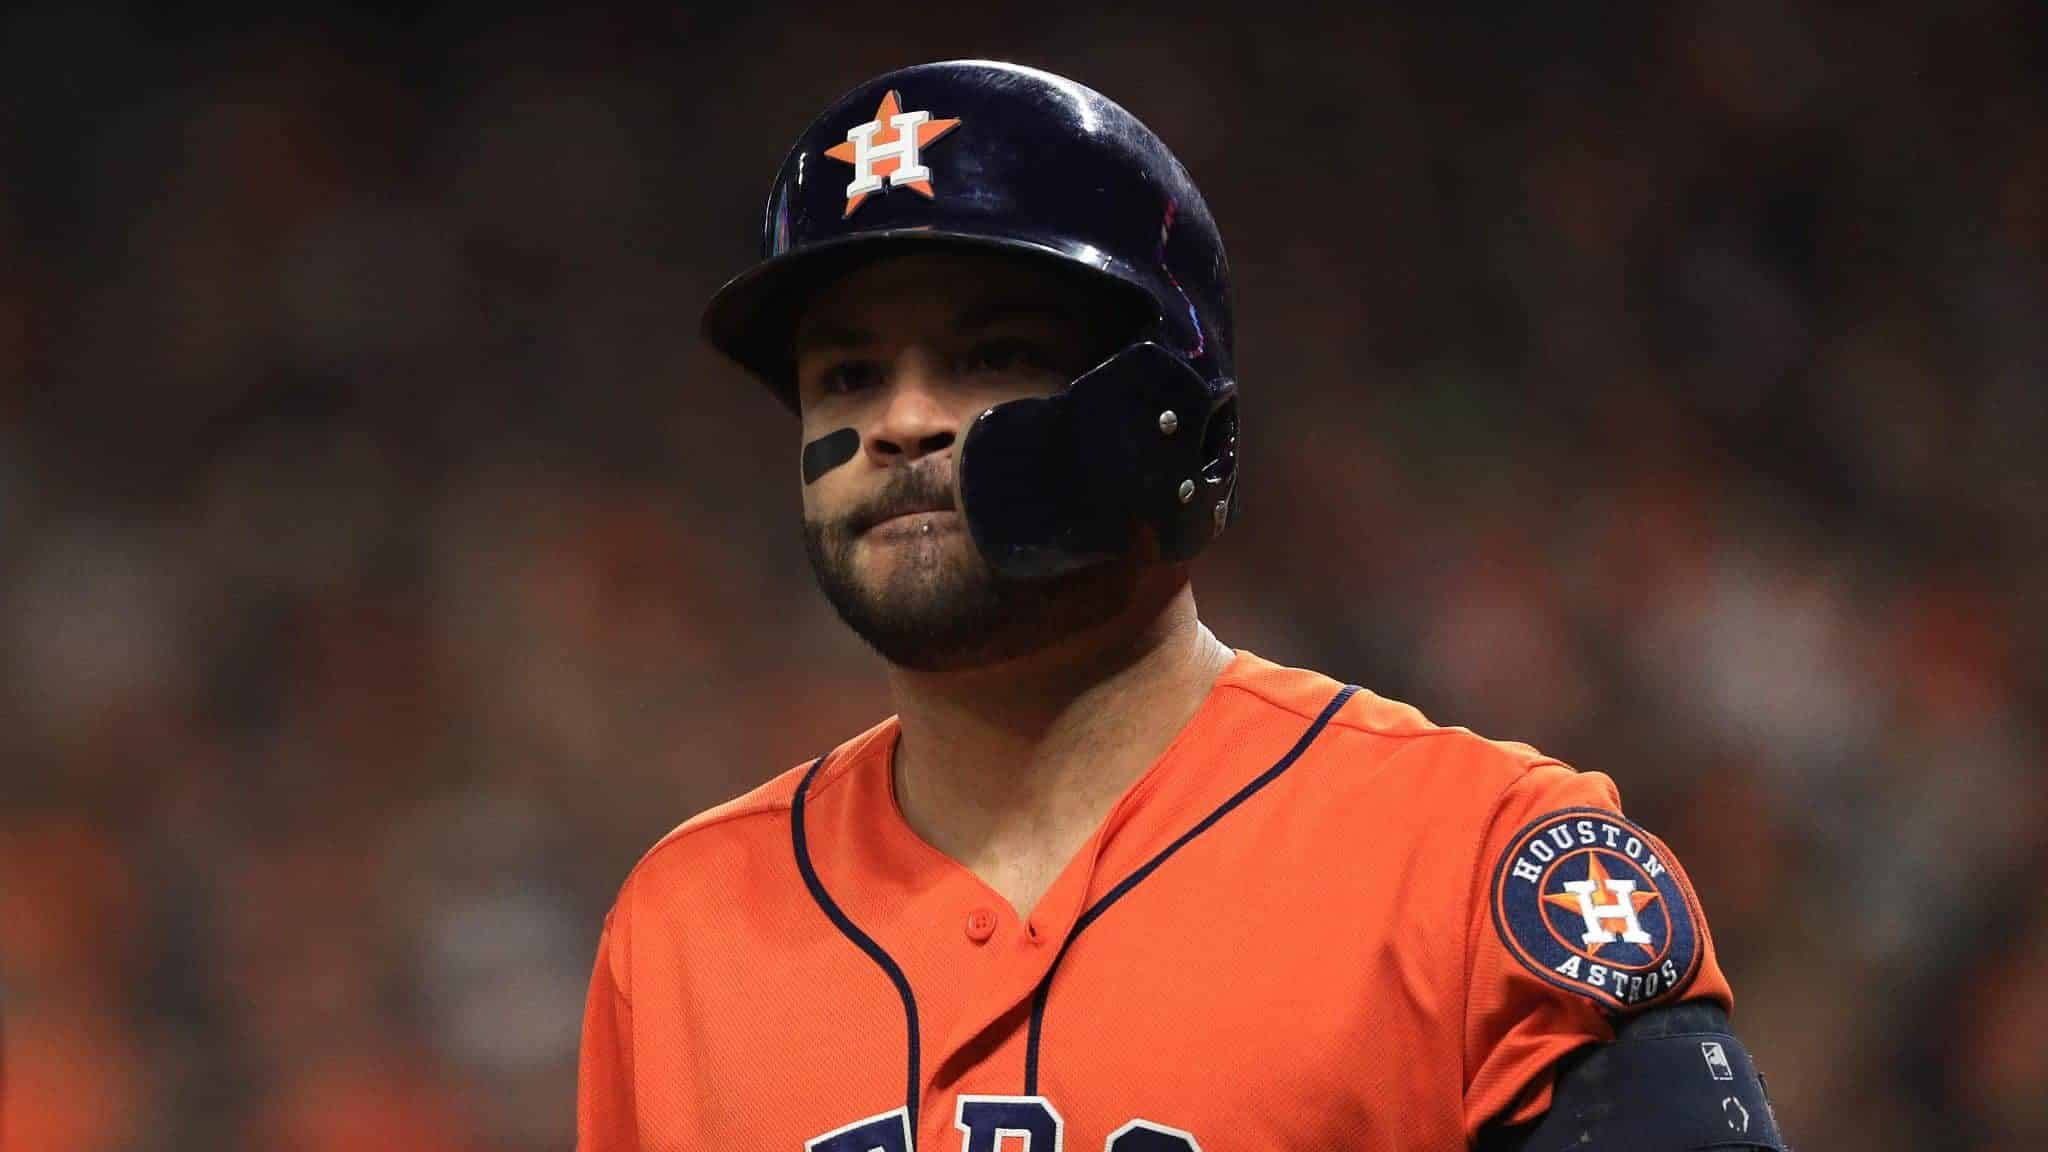 HOUSTON, TEXAS - OCTOBER 30: Jose Altuve #27 of the Houston Astros reacts after he lines out against the Washington Nationals during the fourth inning in Game Seven of the 2019 World Series at Minute Maid Park on October 30, 2019 in Houston, Texas.